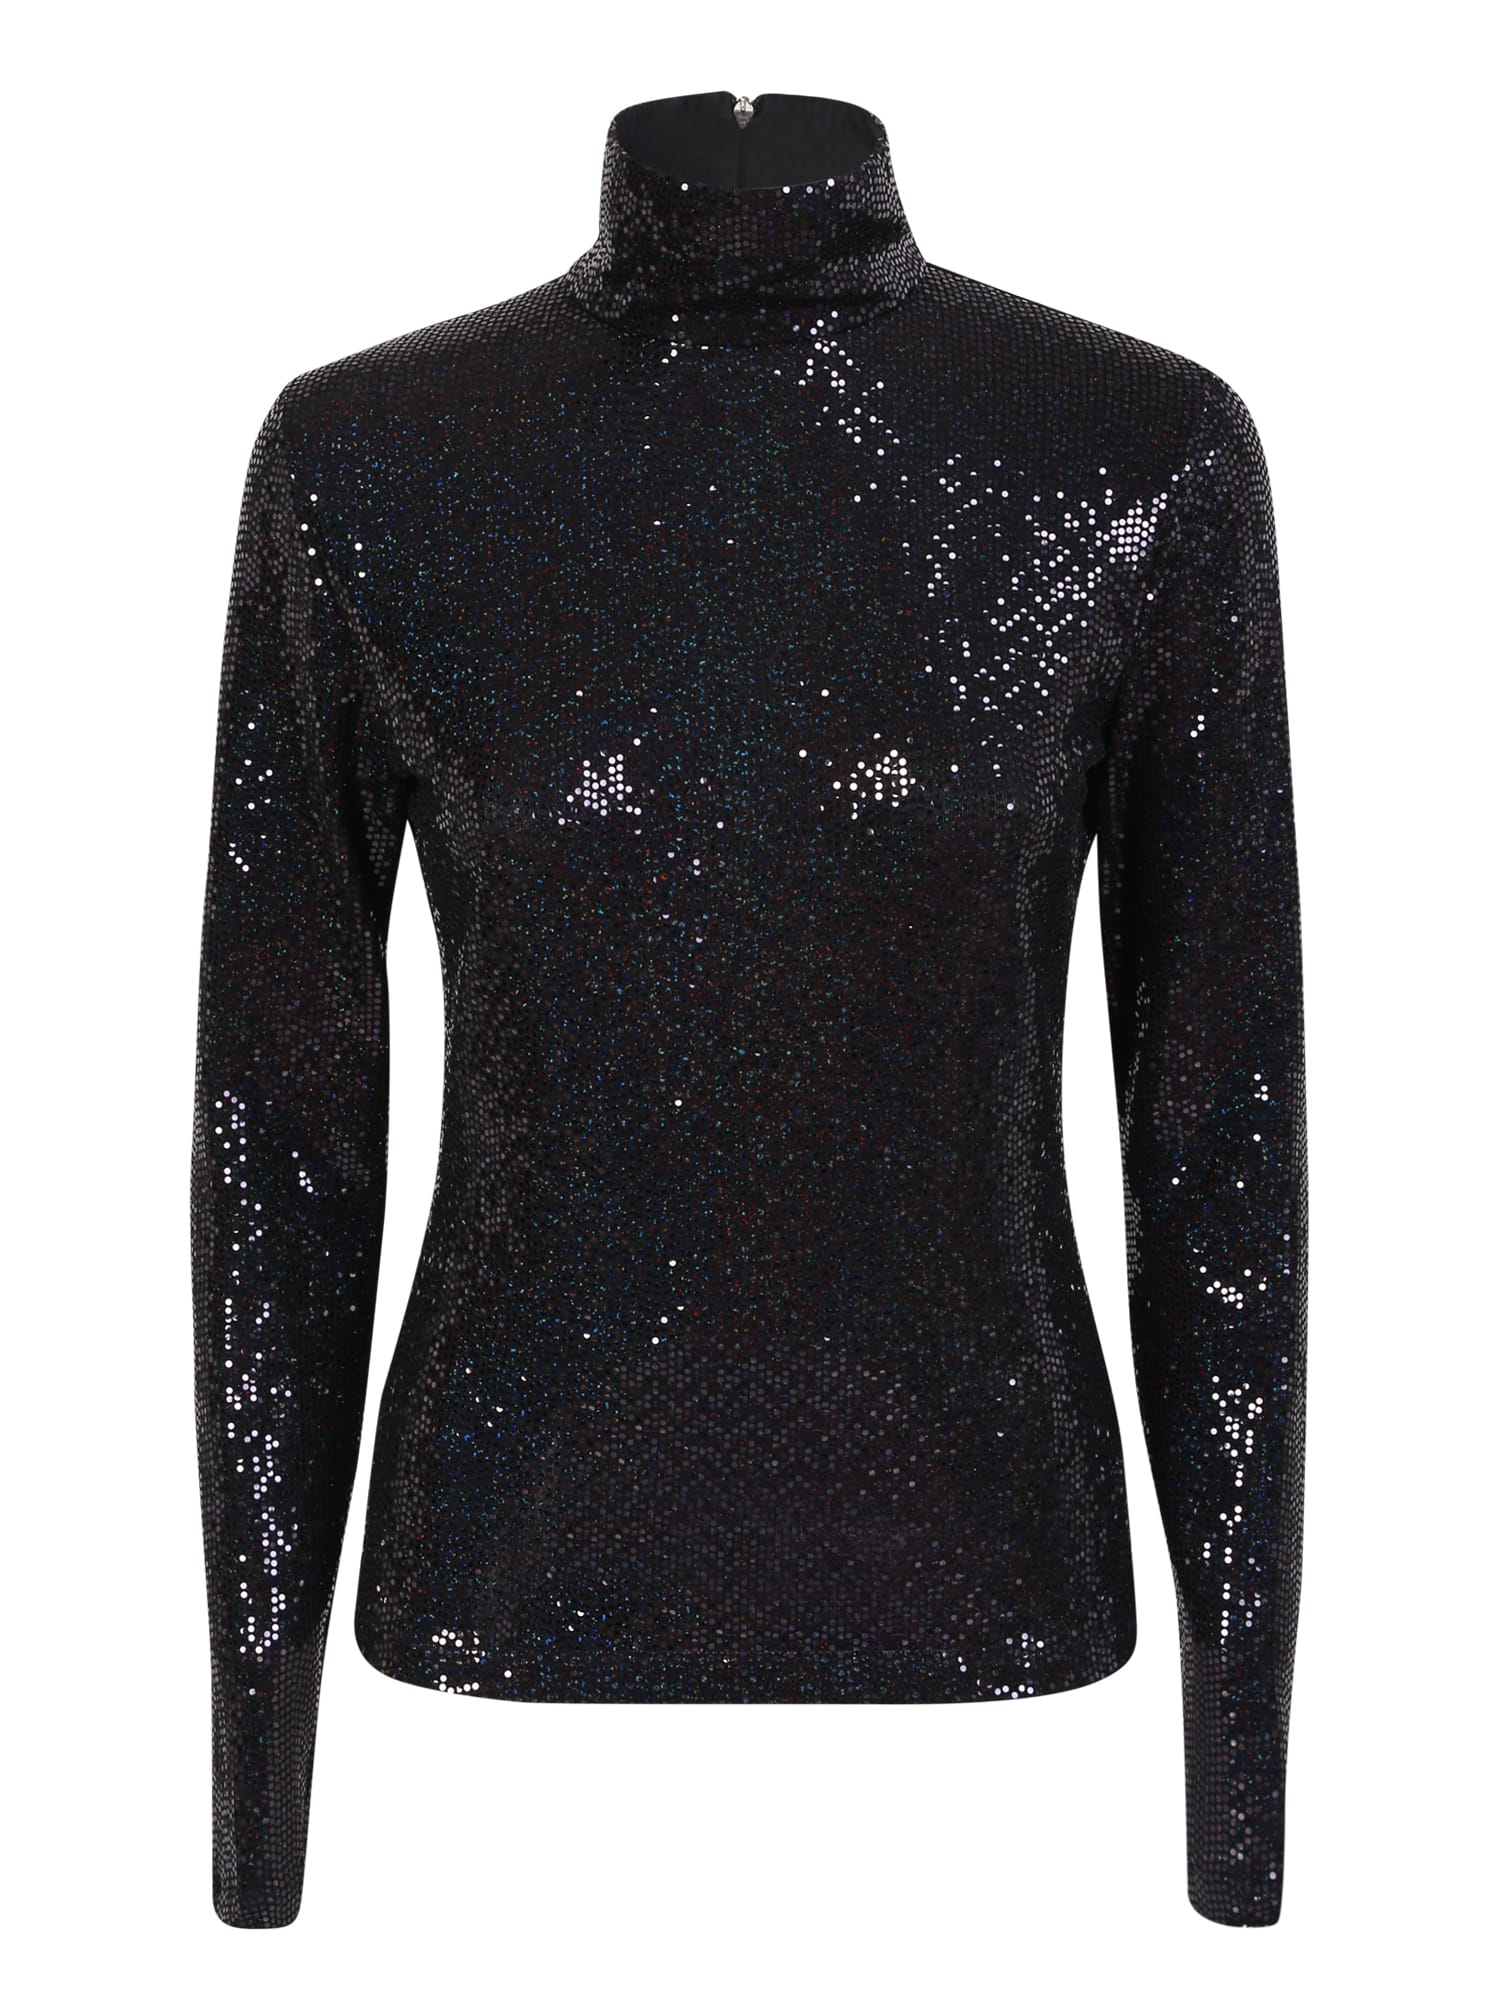 High Neck Top Covered With Sequins By. Innovative And Alternative Design, Casual But Sporty MSGM